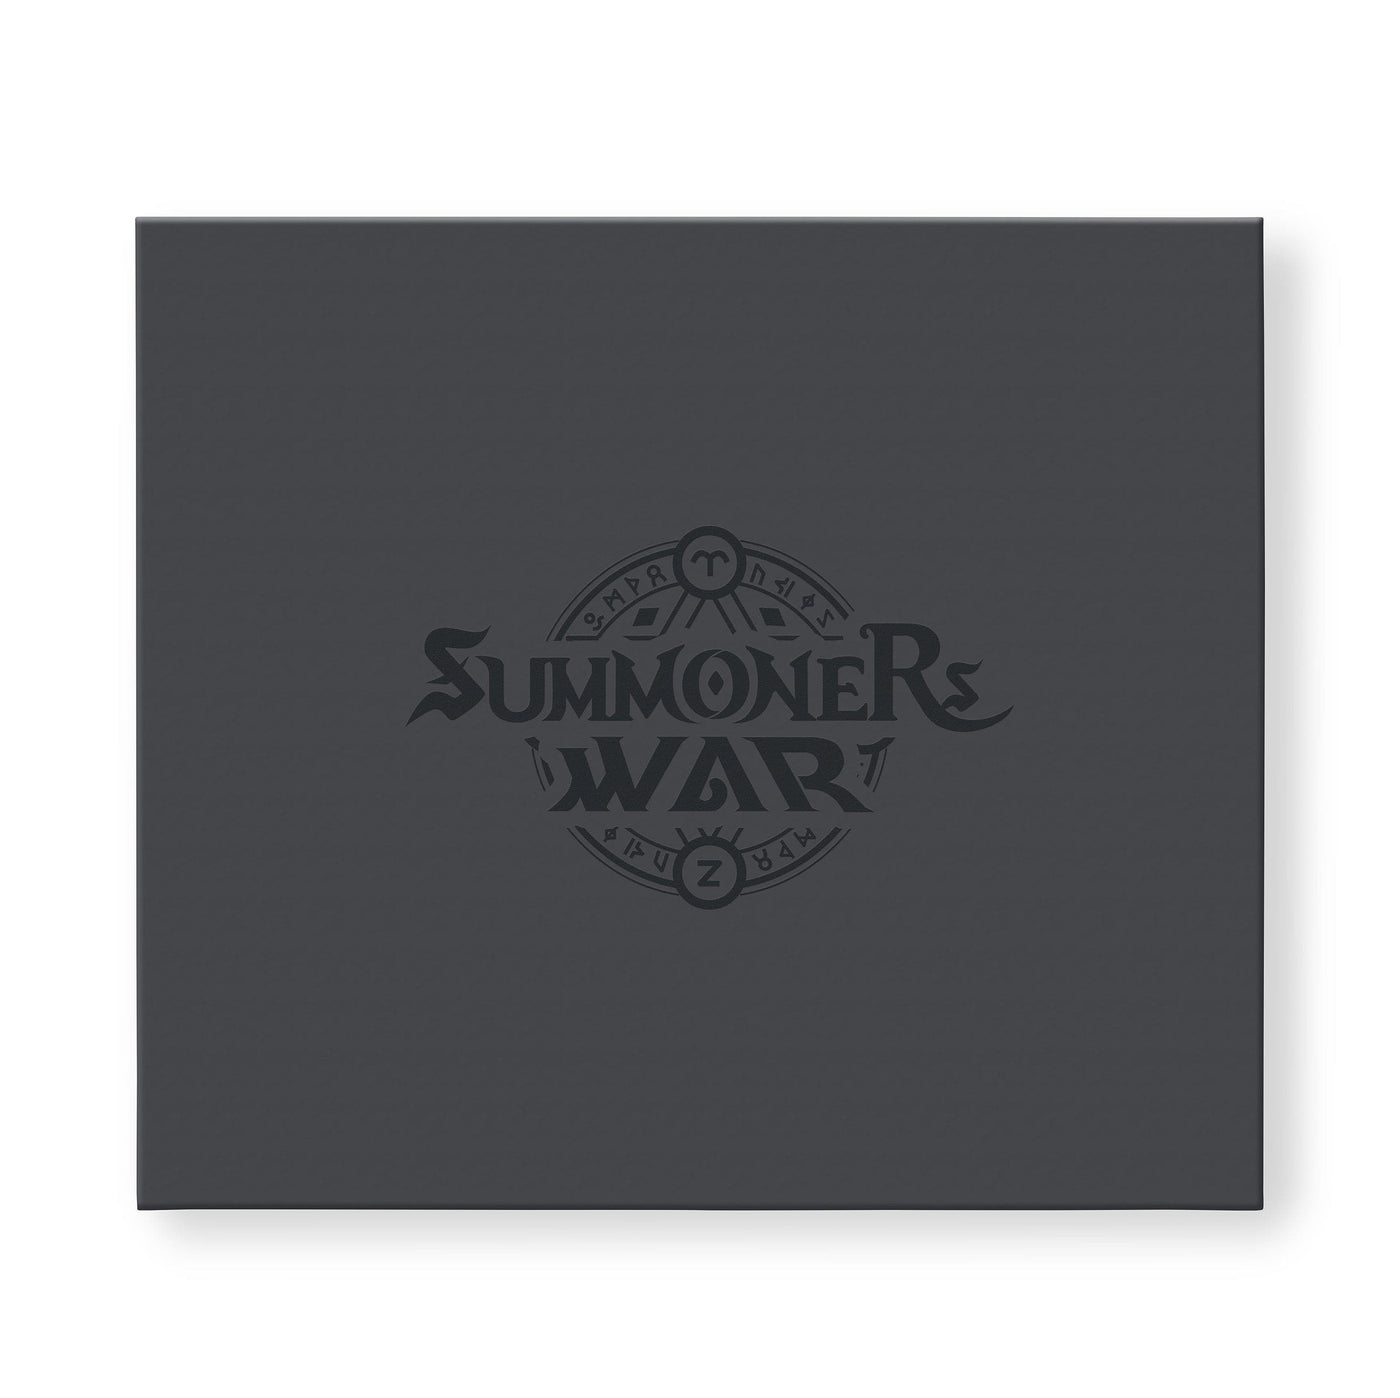 [Summoners War] Wireless Charger - Com2uS Store